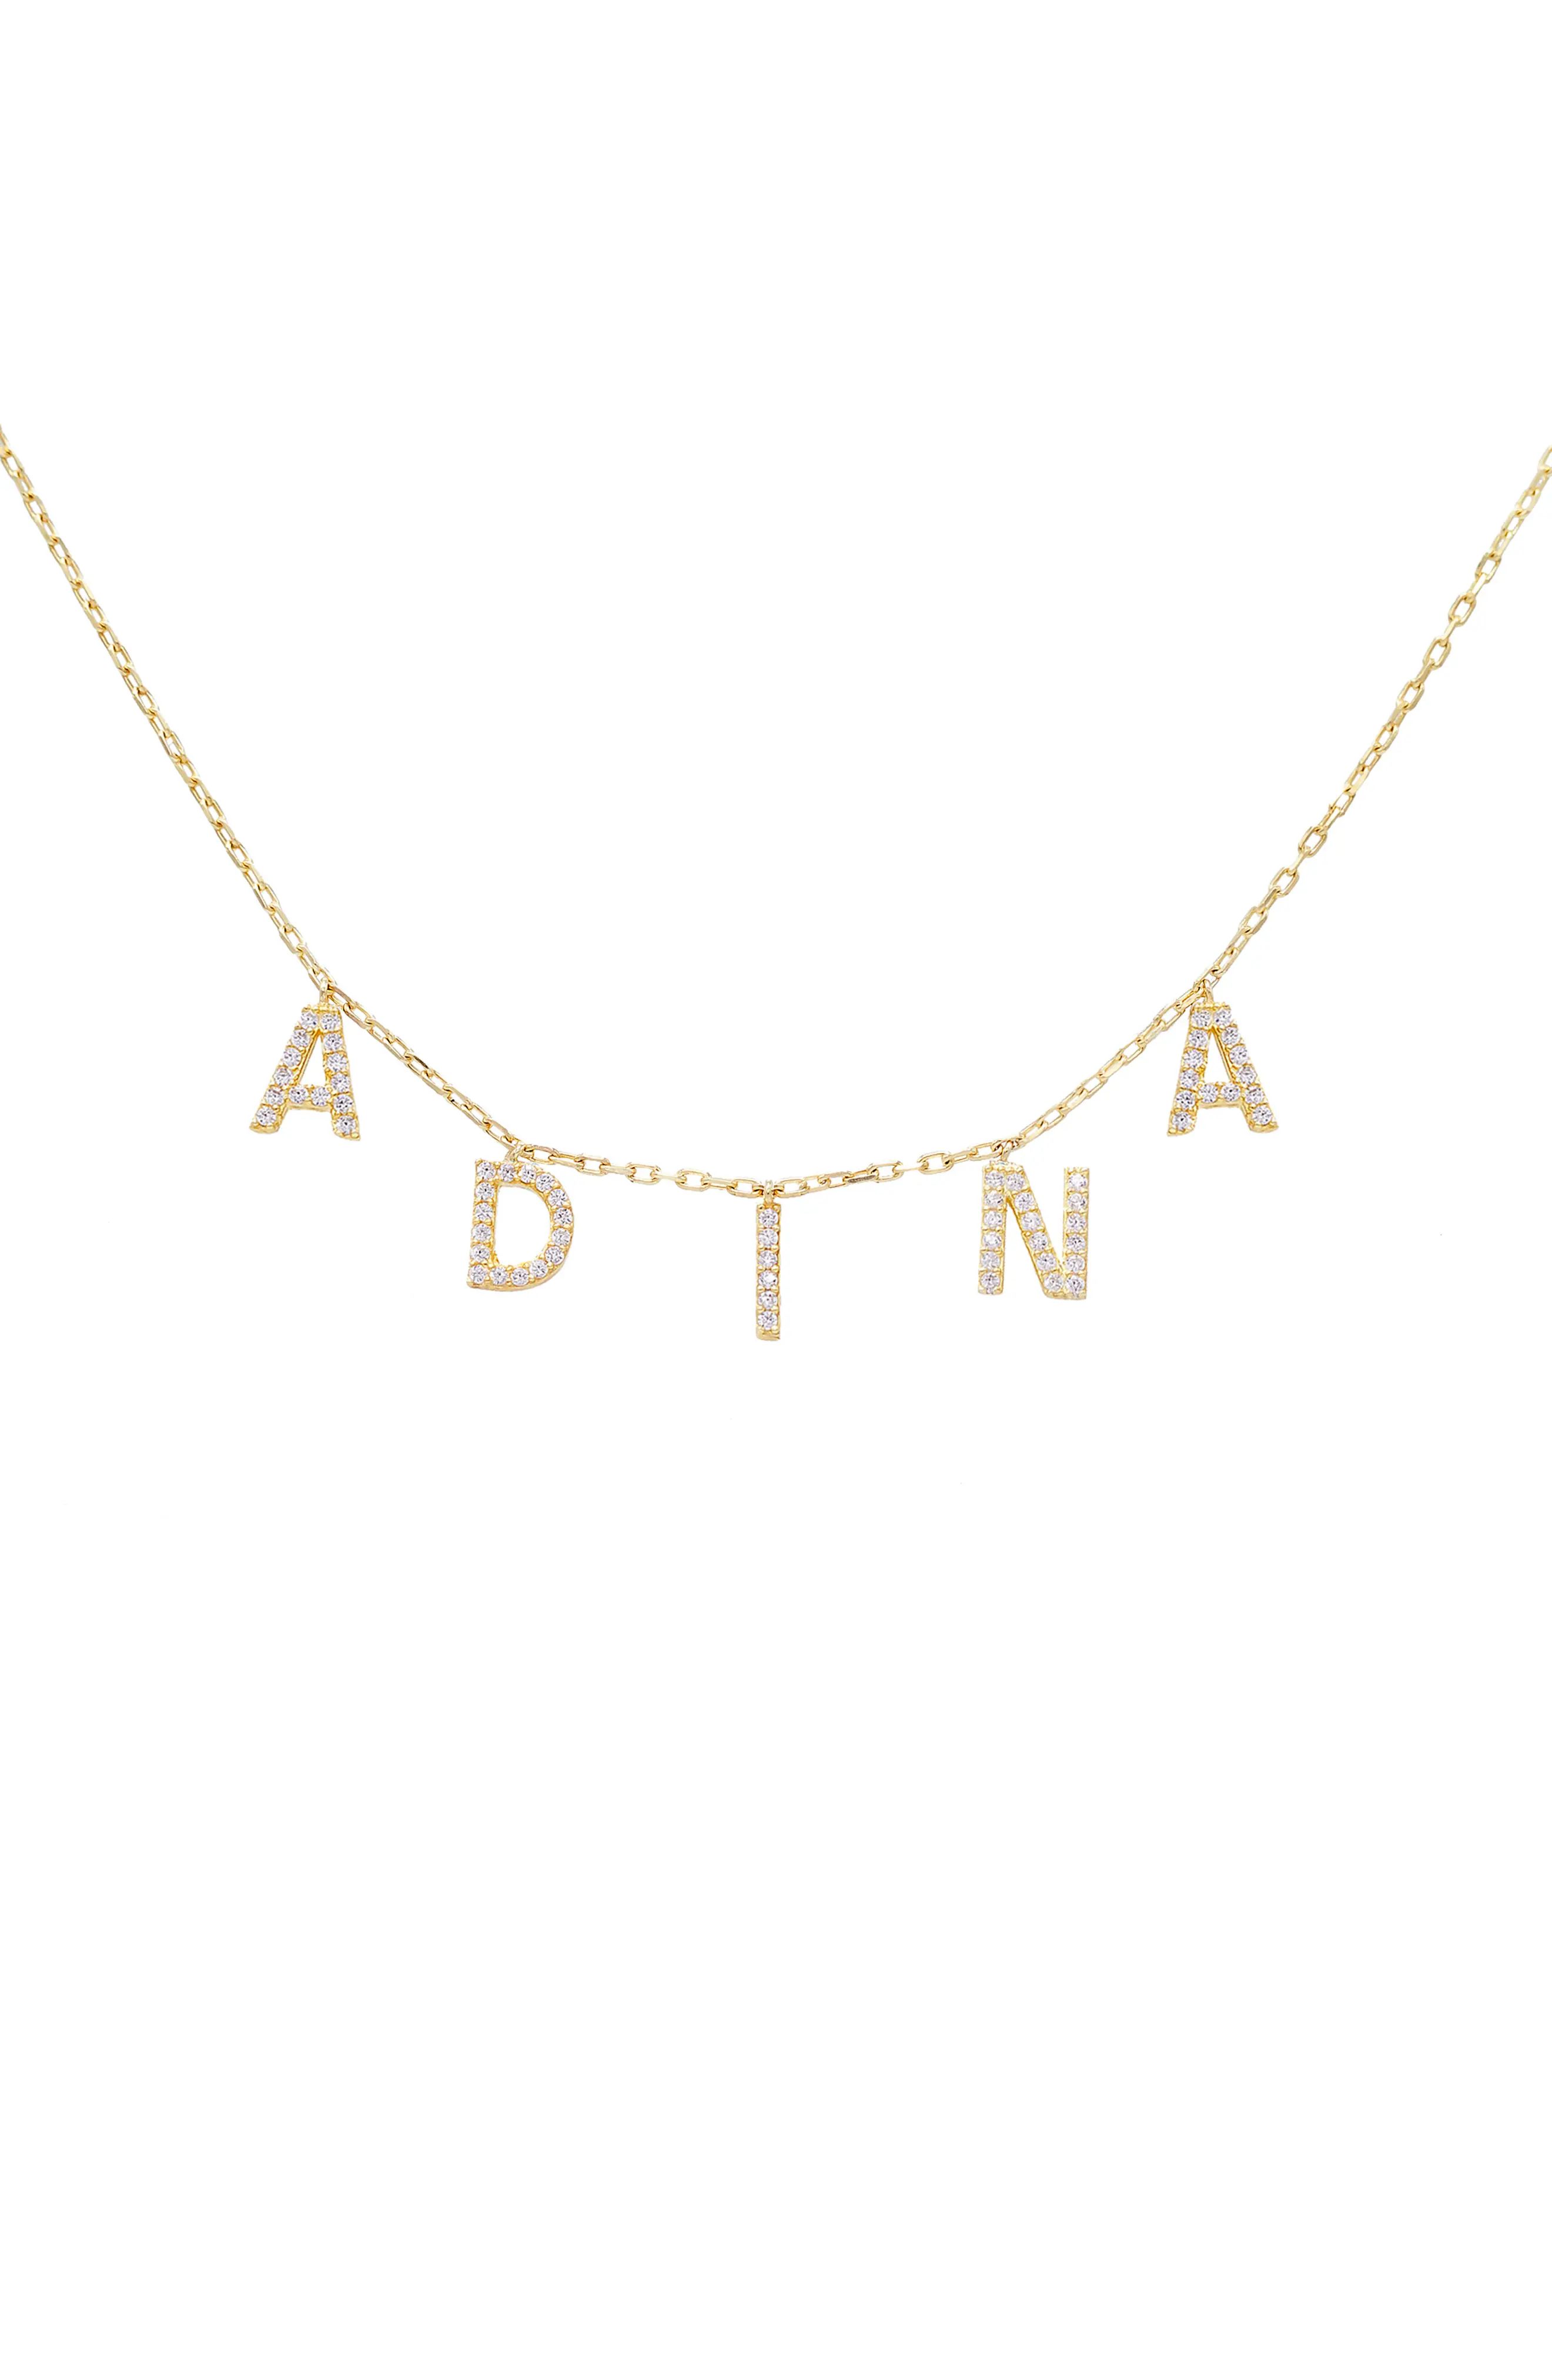 Women's Adina's Jewels Personalized Pave Block Name Shaker Necklace | Nordstrom